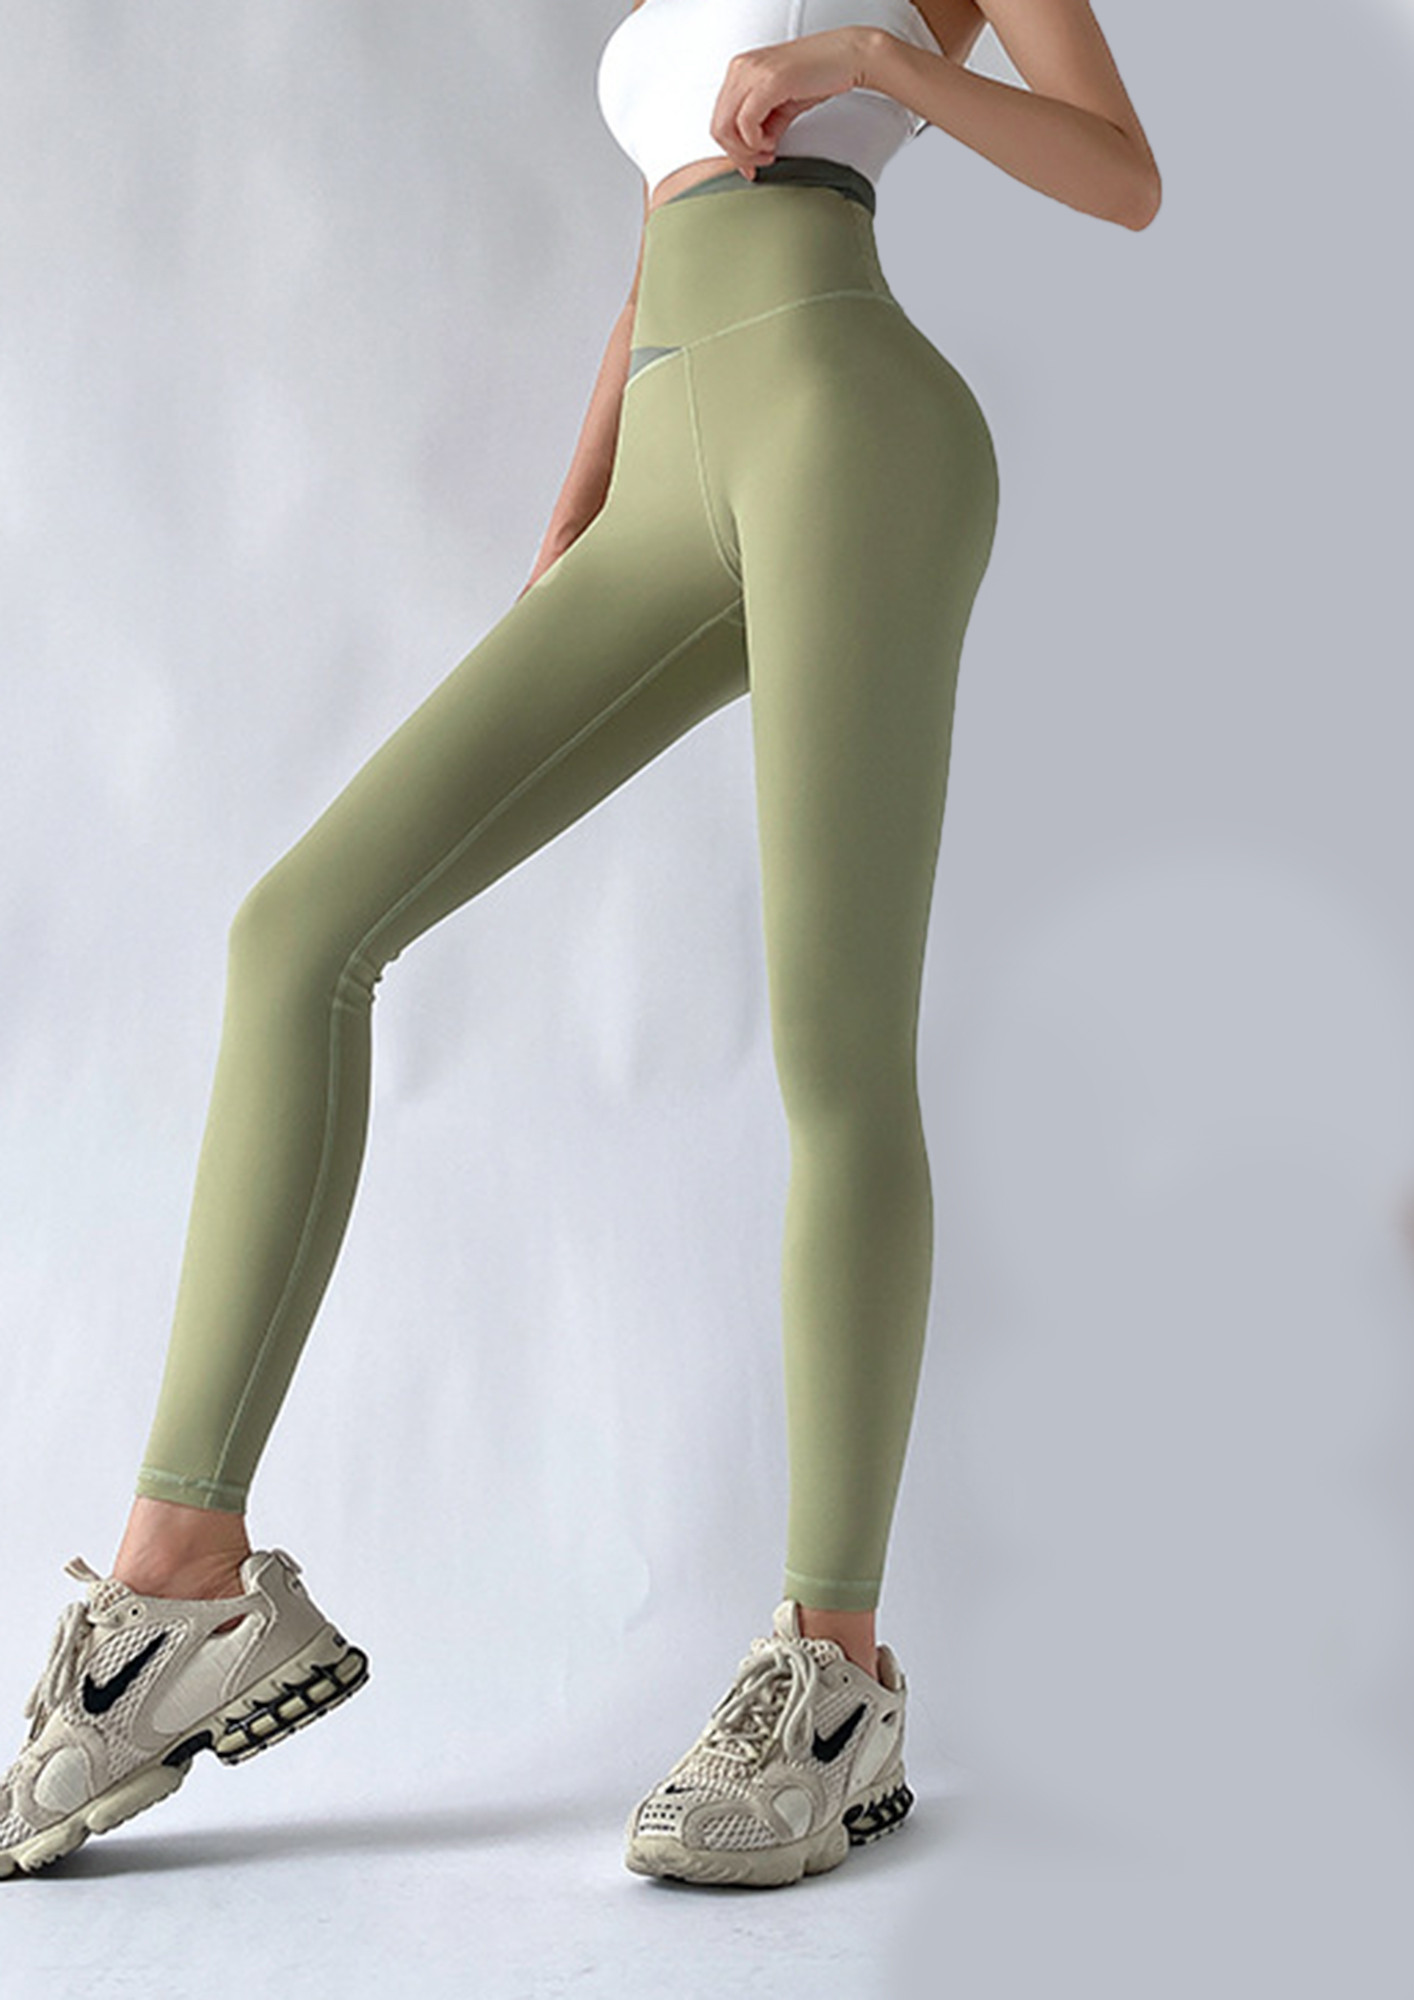 TRIED AND TESTED GREEN TRAINING TIGHTS